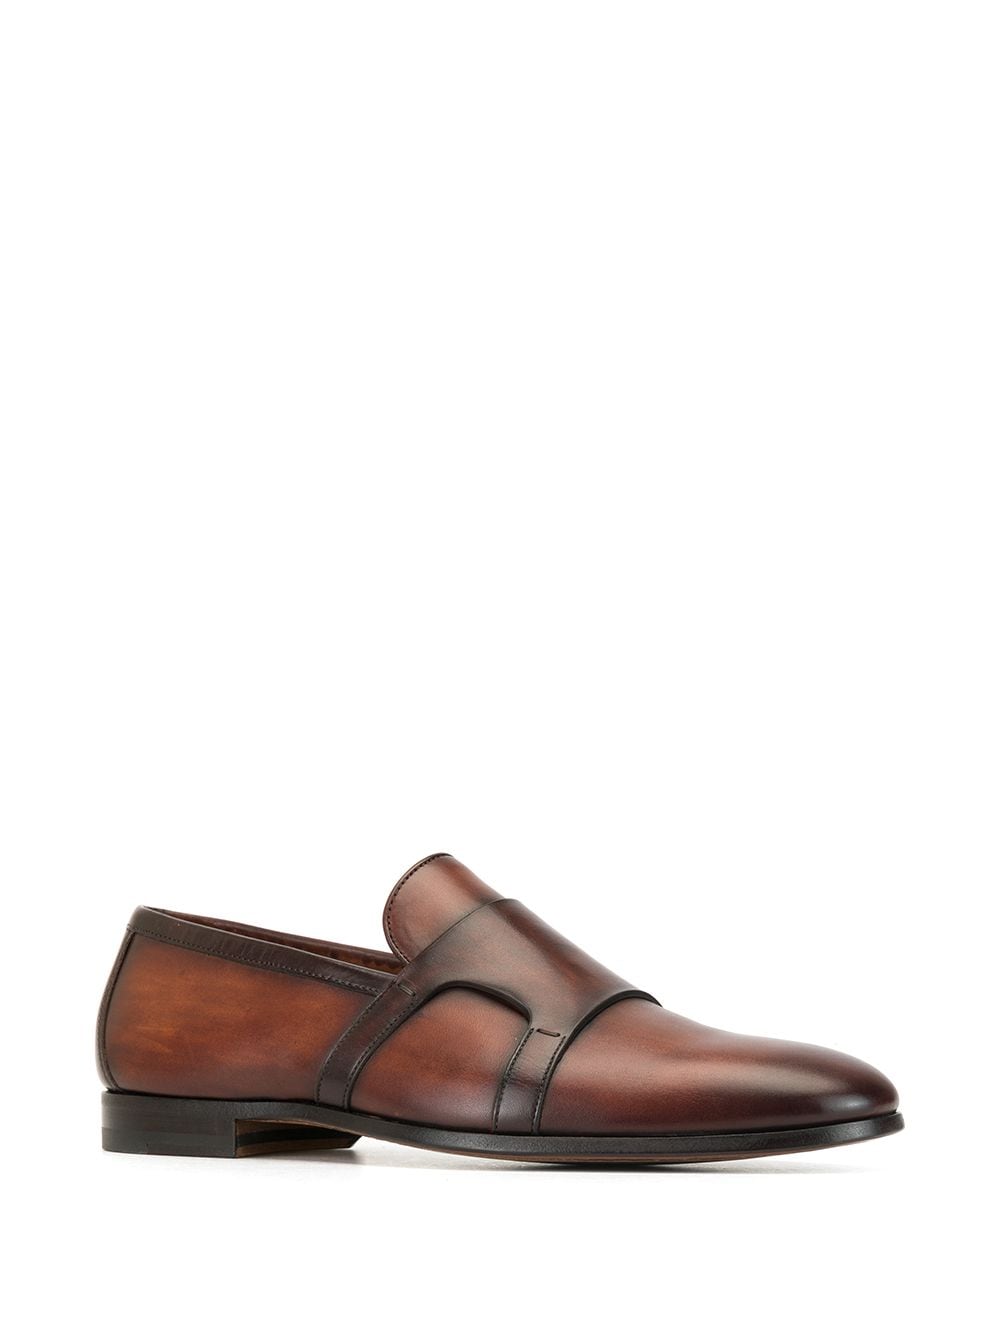 Image 2 of Magnanni low heel loafers